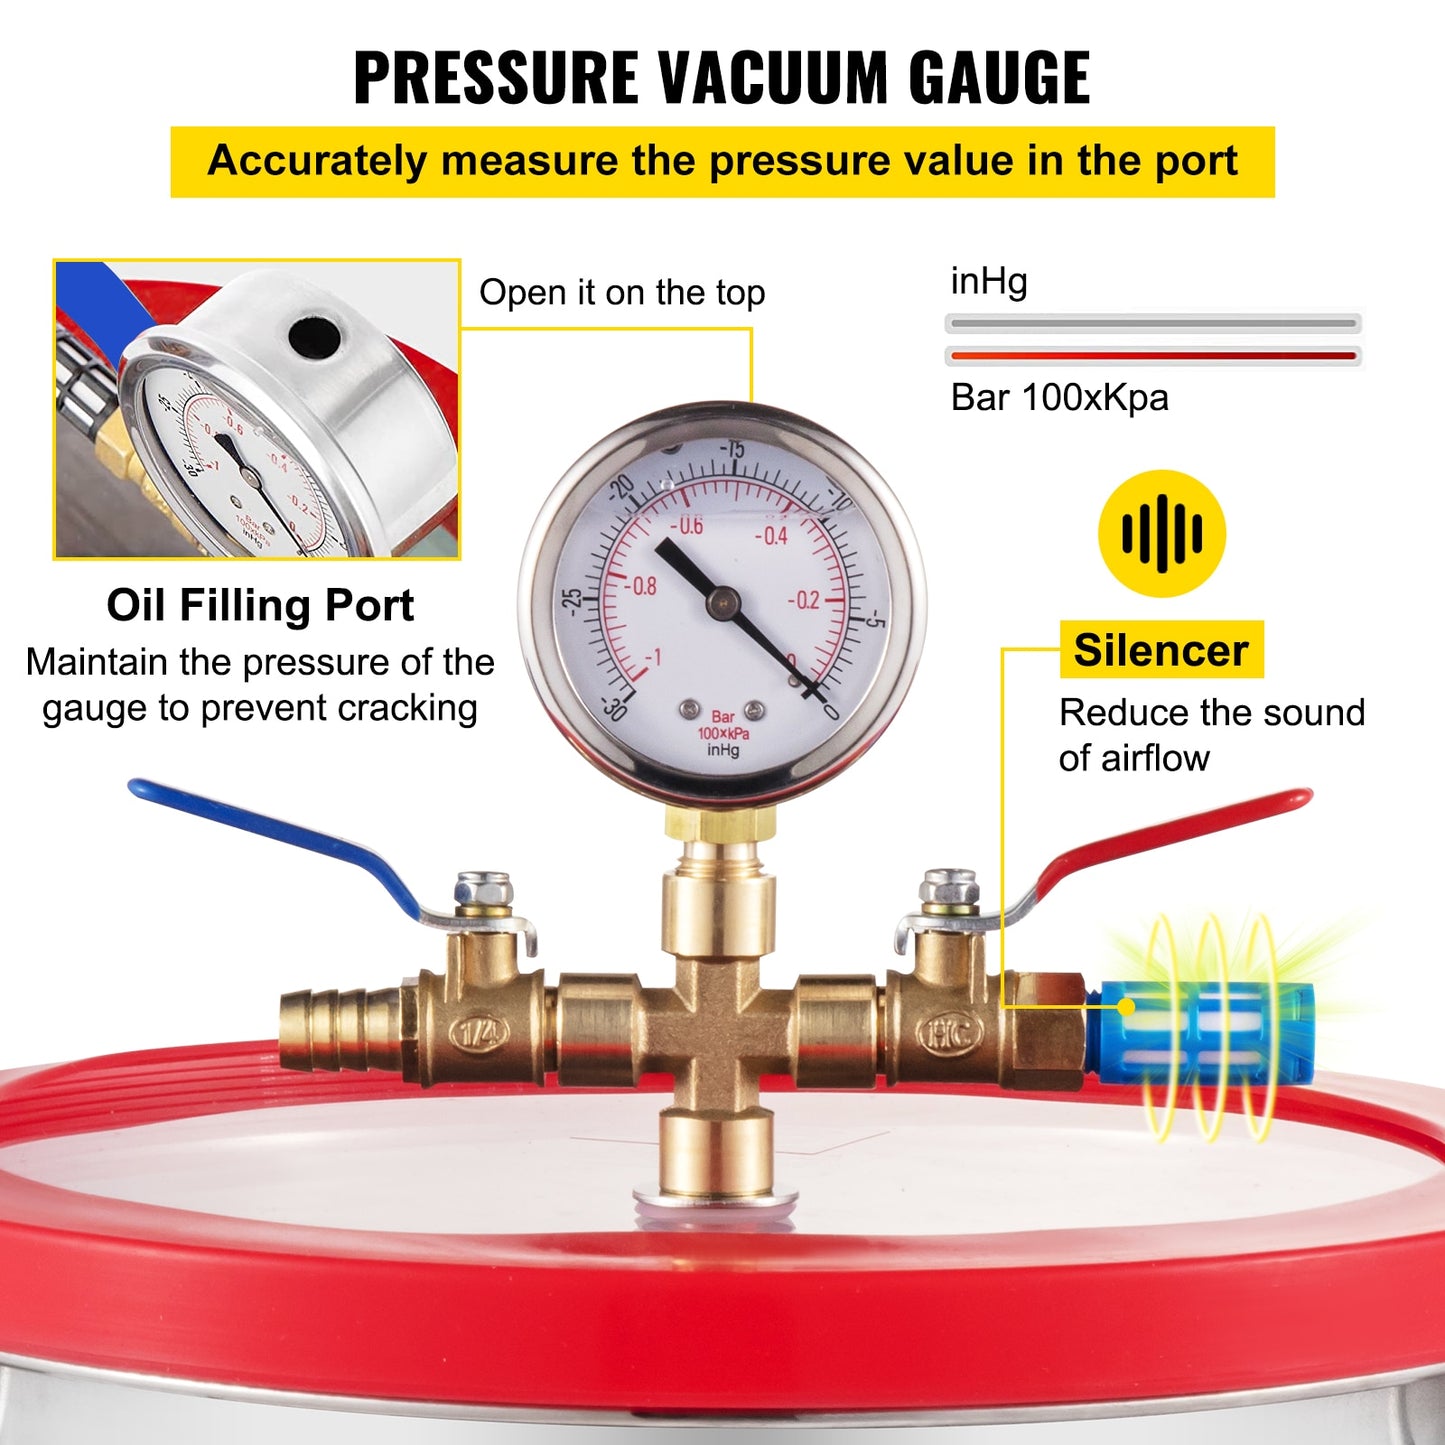 Stainless Steel Vacuum Chamber with Multiple Gallon Options, Acrylic Lid, and High-Performance Silicone Lid Gasket